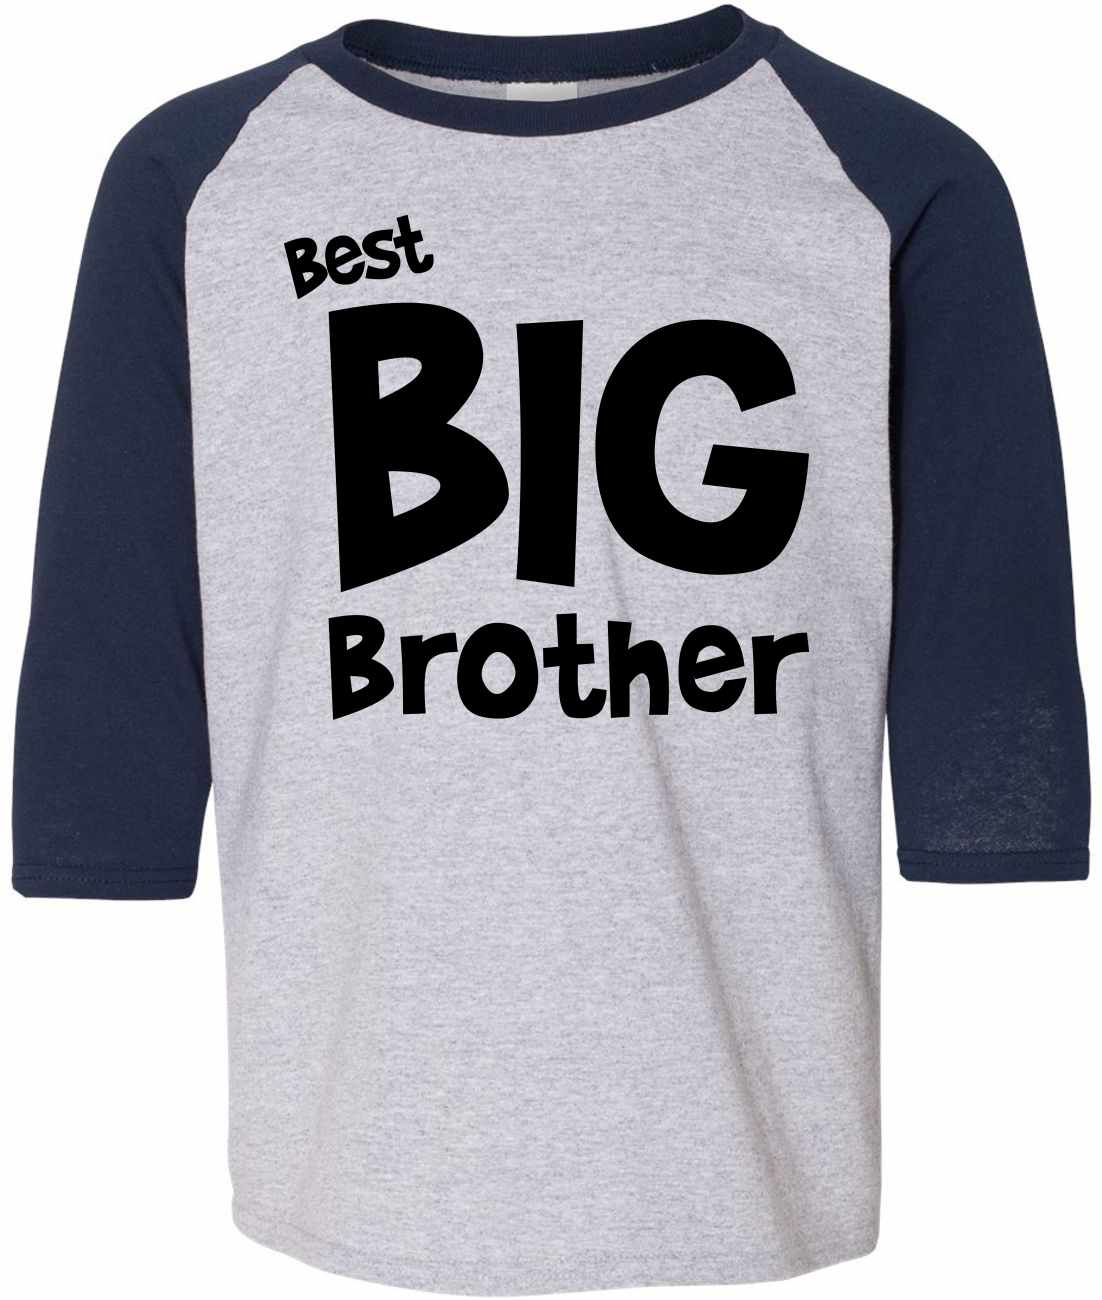 Best Big Brother on Youth Baseball Shirt (#1138-212)